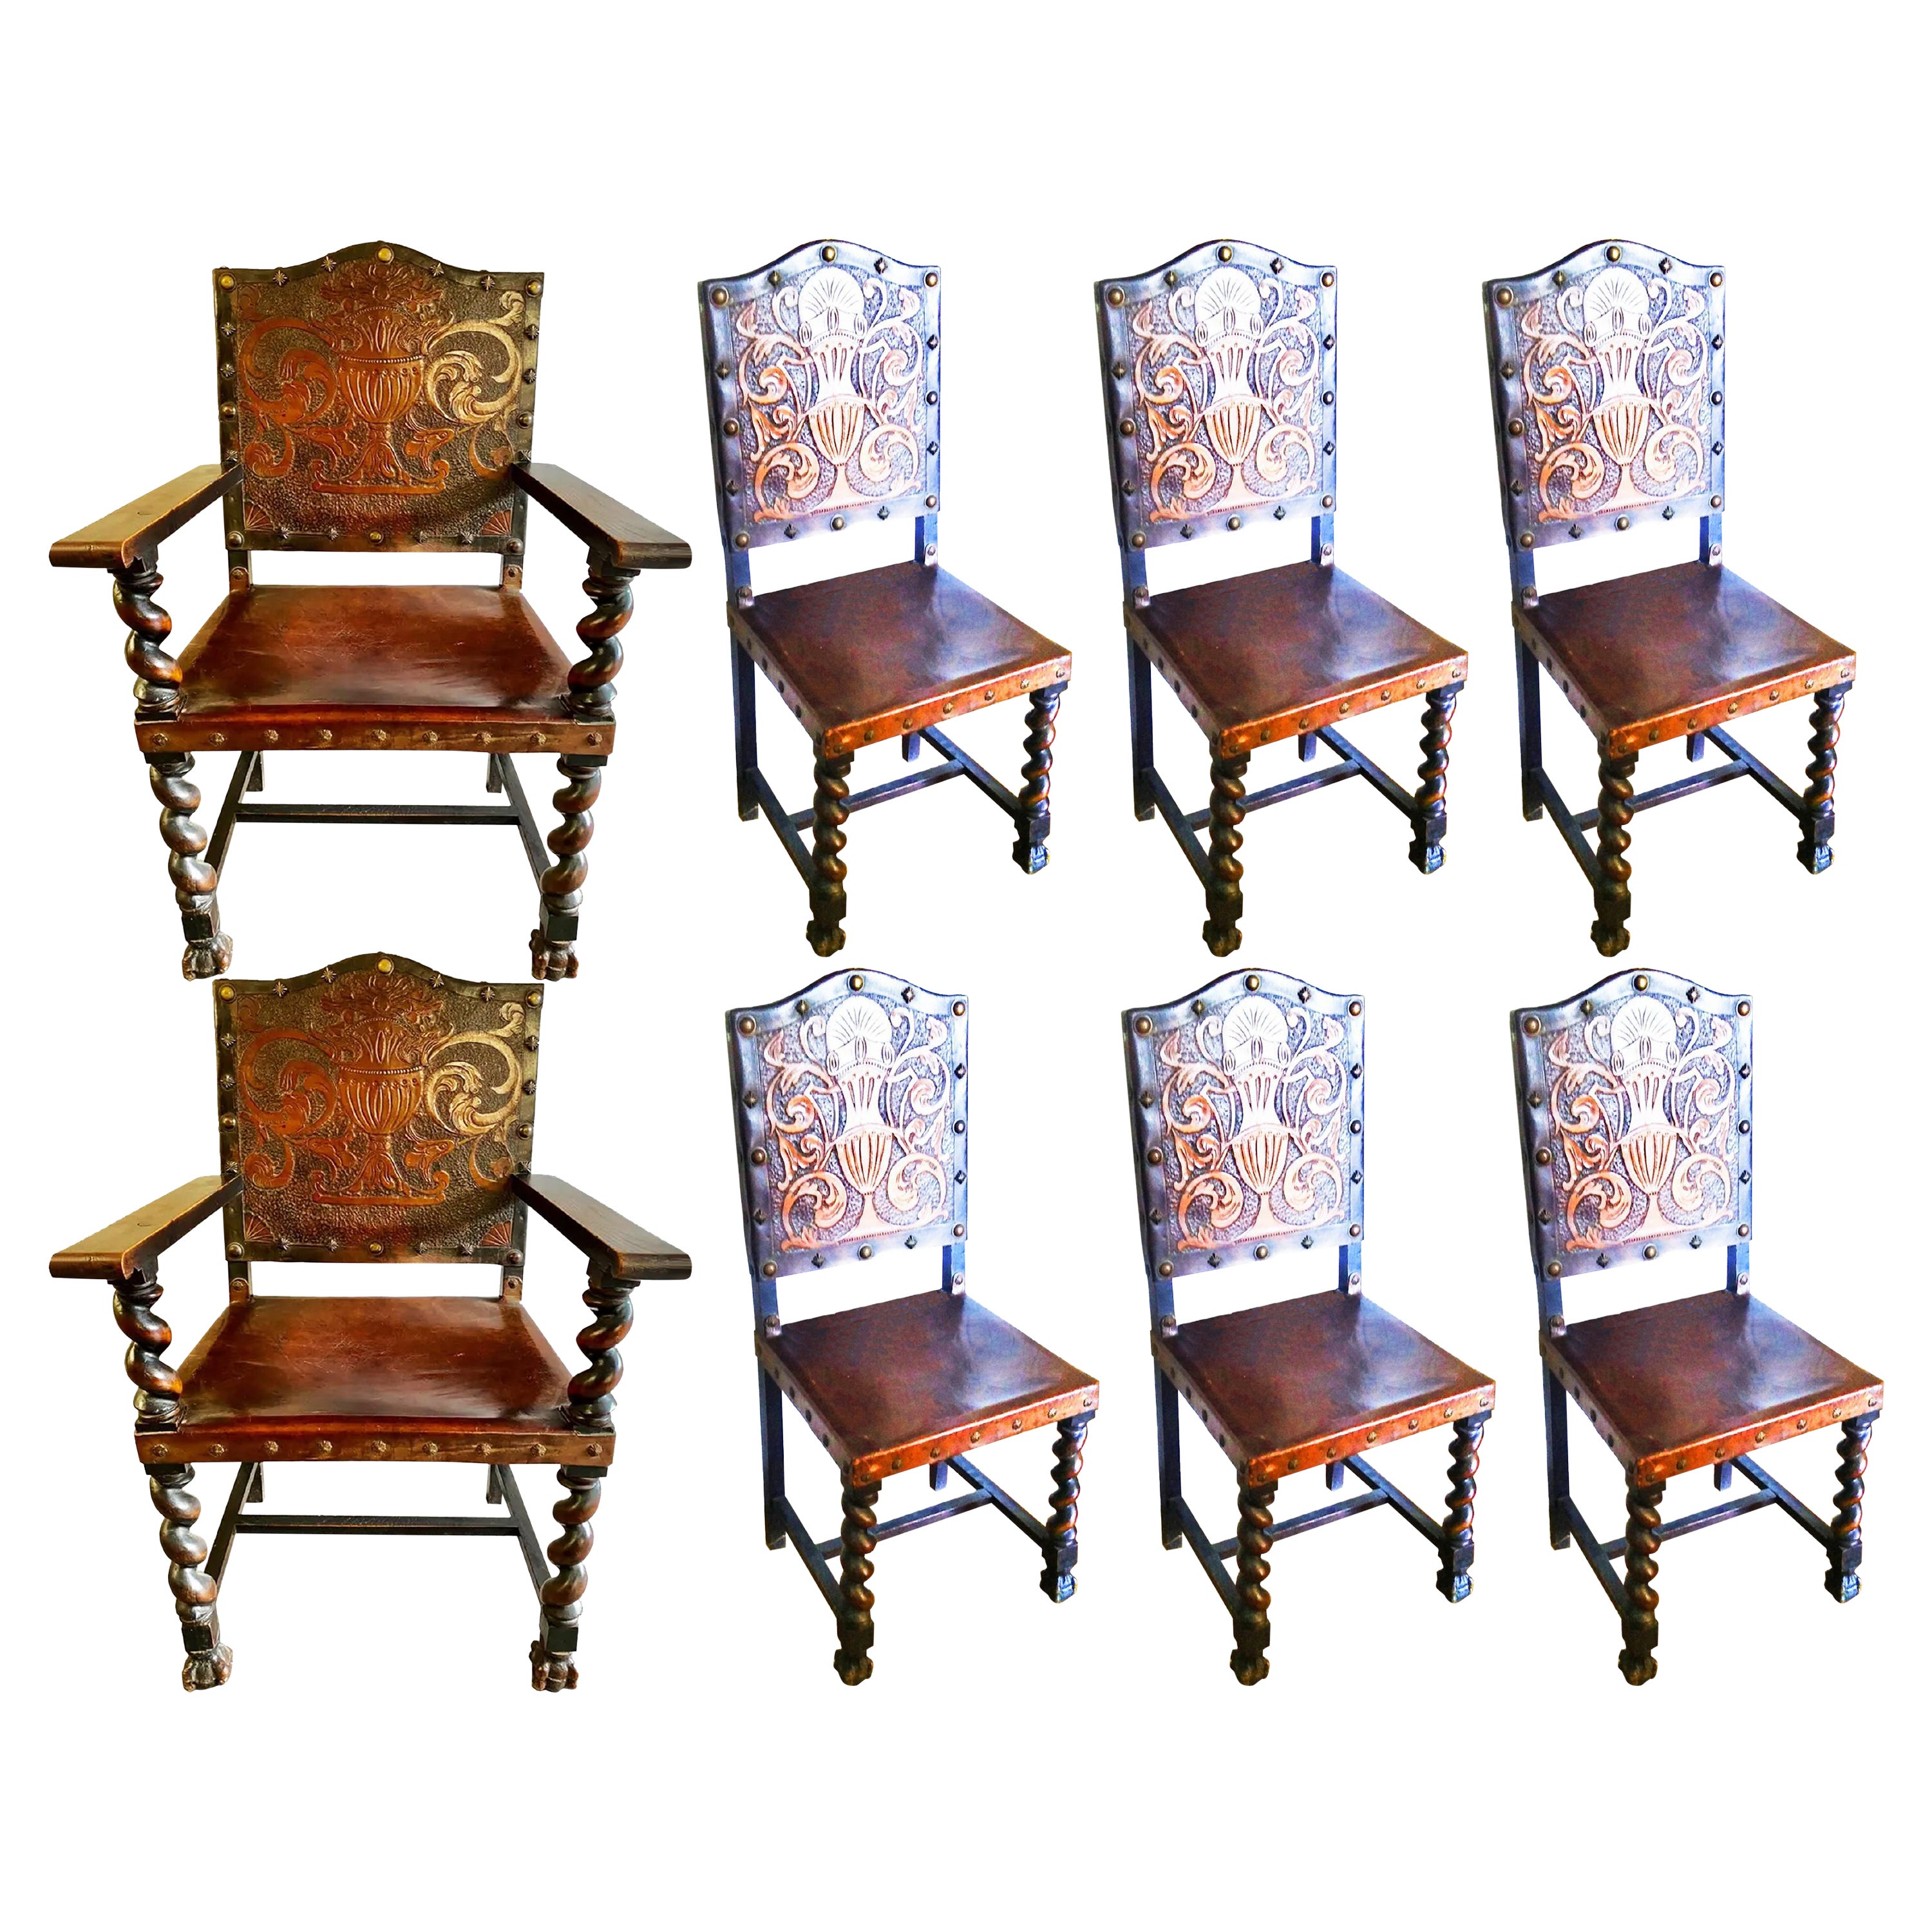 Set Dining Chairs Barley Twist Renaissance Revival Throne, Turn of the Century